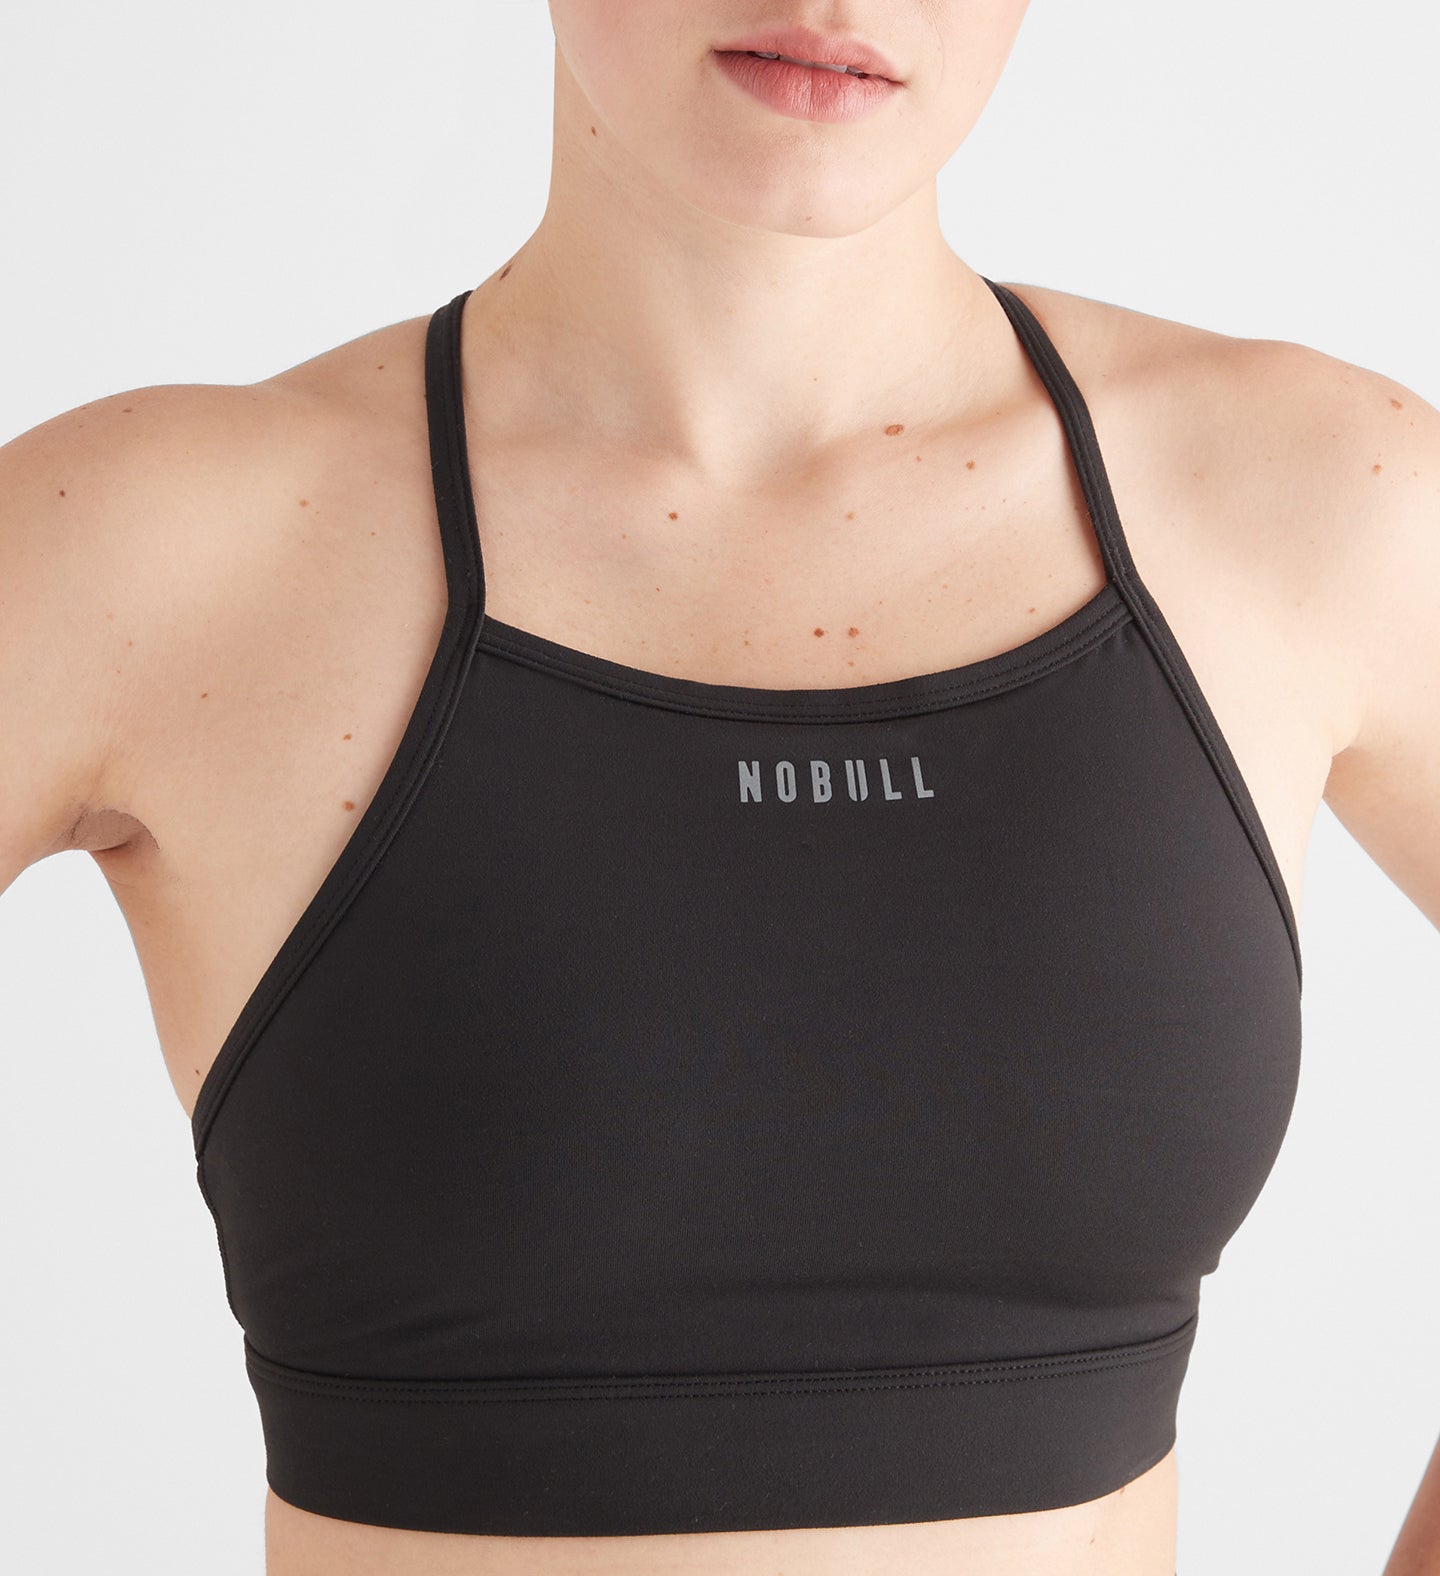 IN STOCK-M] HIGH NECK WOMAN DEEP V BACK SPORTS BRA, Women's Fashion,  Activewear on Carousell